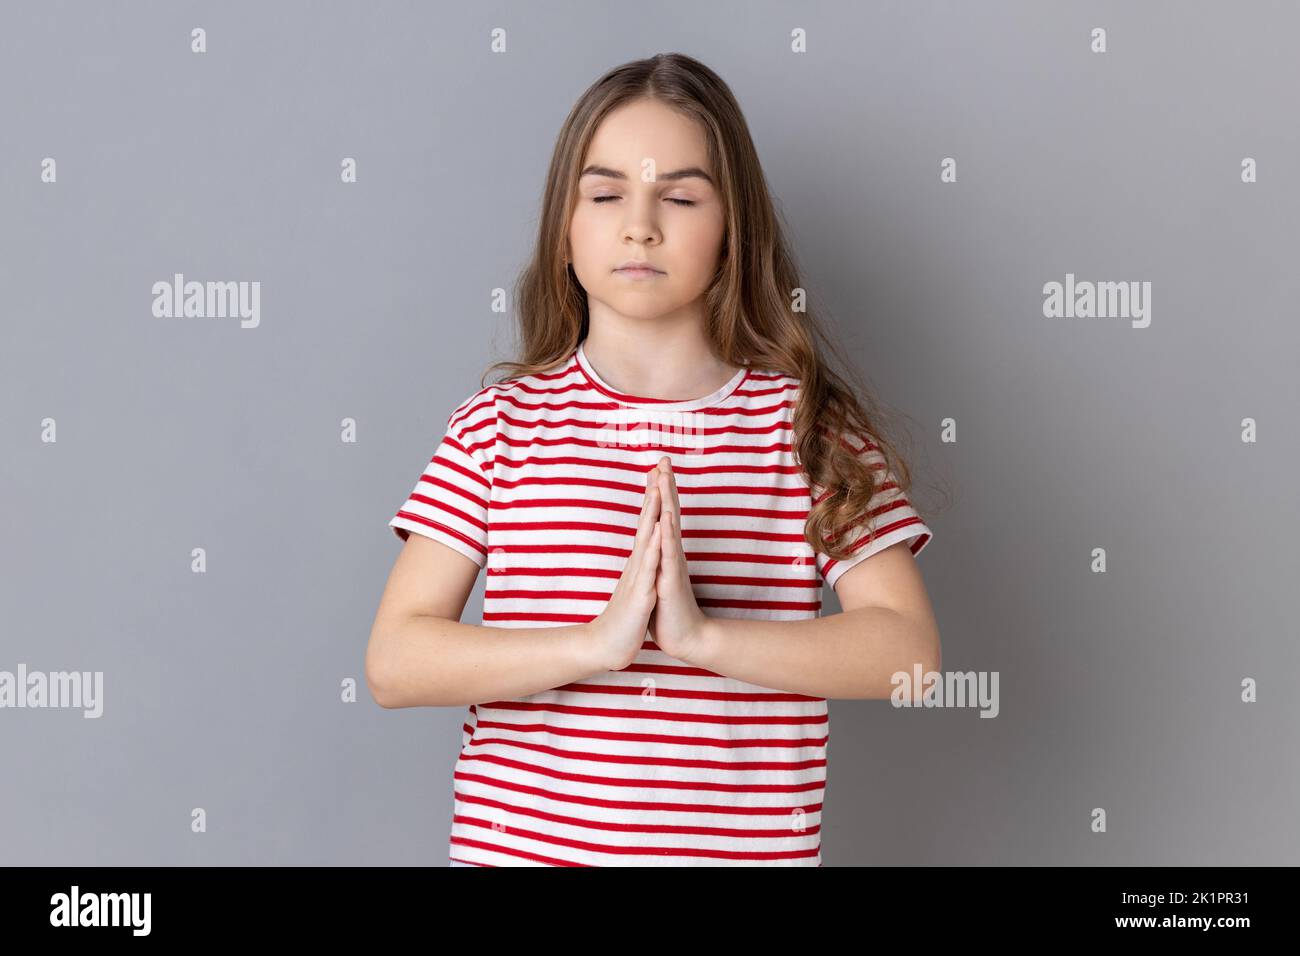 Portrait of little girl wearing striped T-shirt keeping hands namaste gesture, meditating, yoga exercise breath technique reduce stress. Indoor studio shot isolated on gray background. Stock Photo